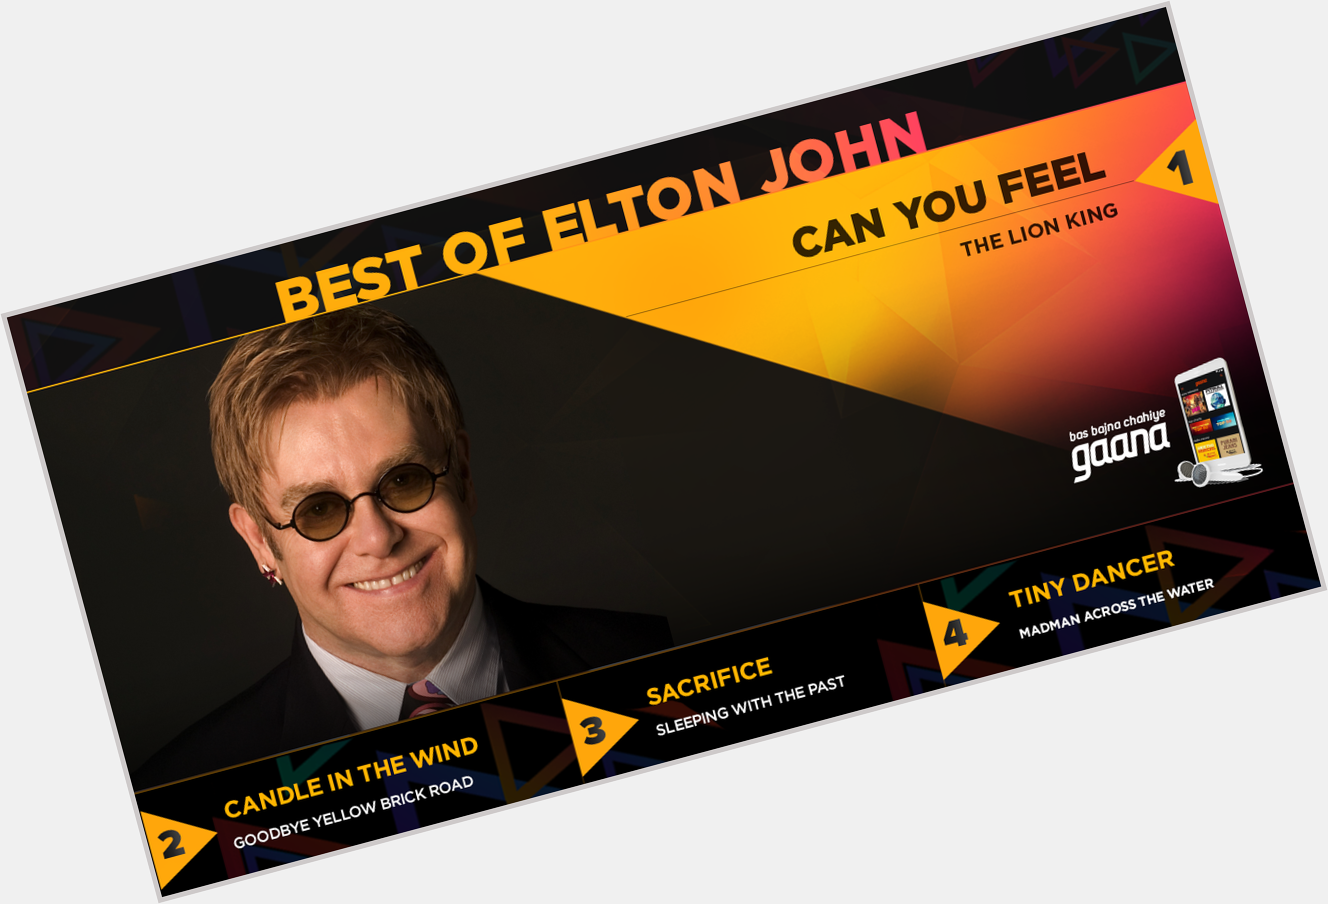 Happy Birthday Elton John! Thank you for the over the past 50 years! 